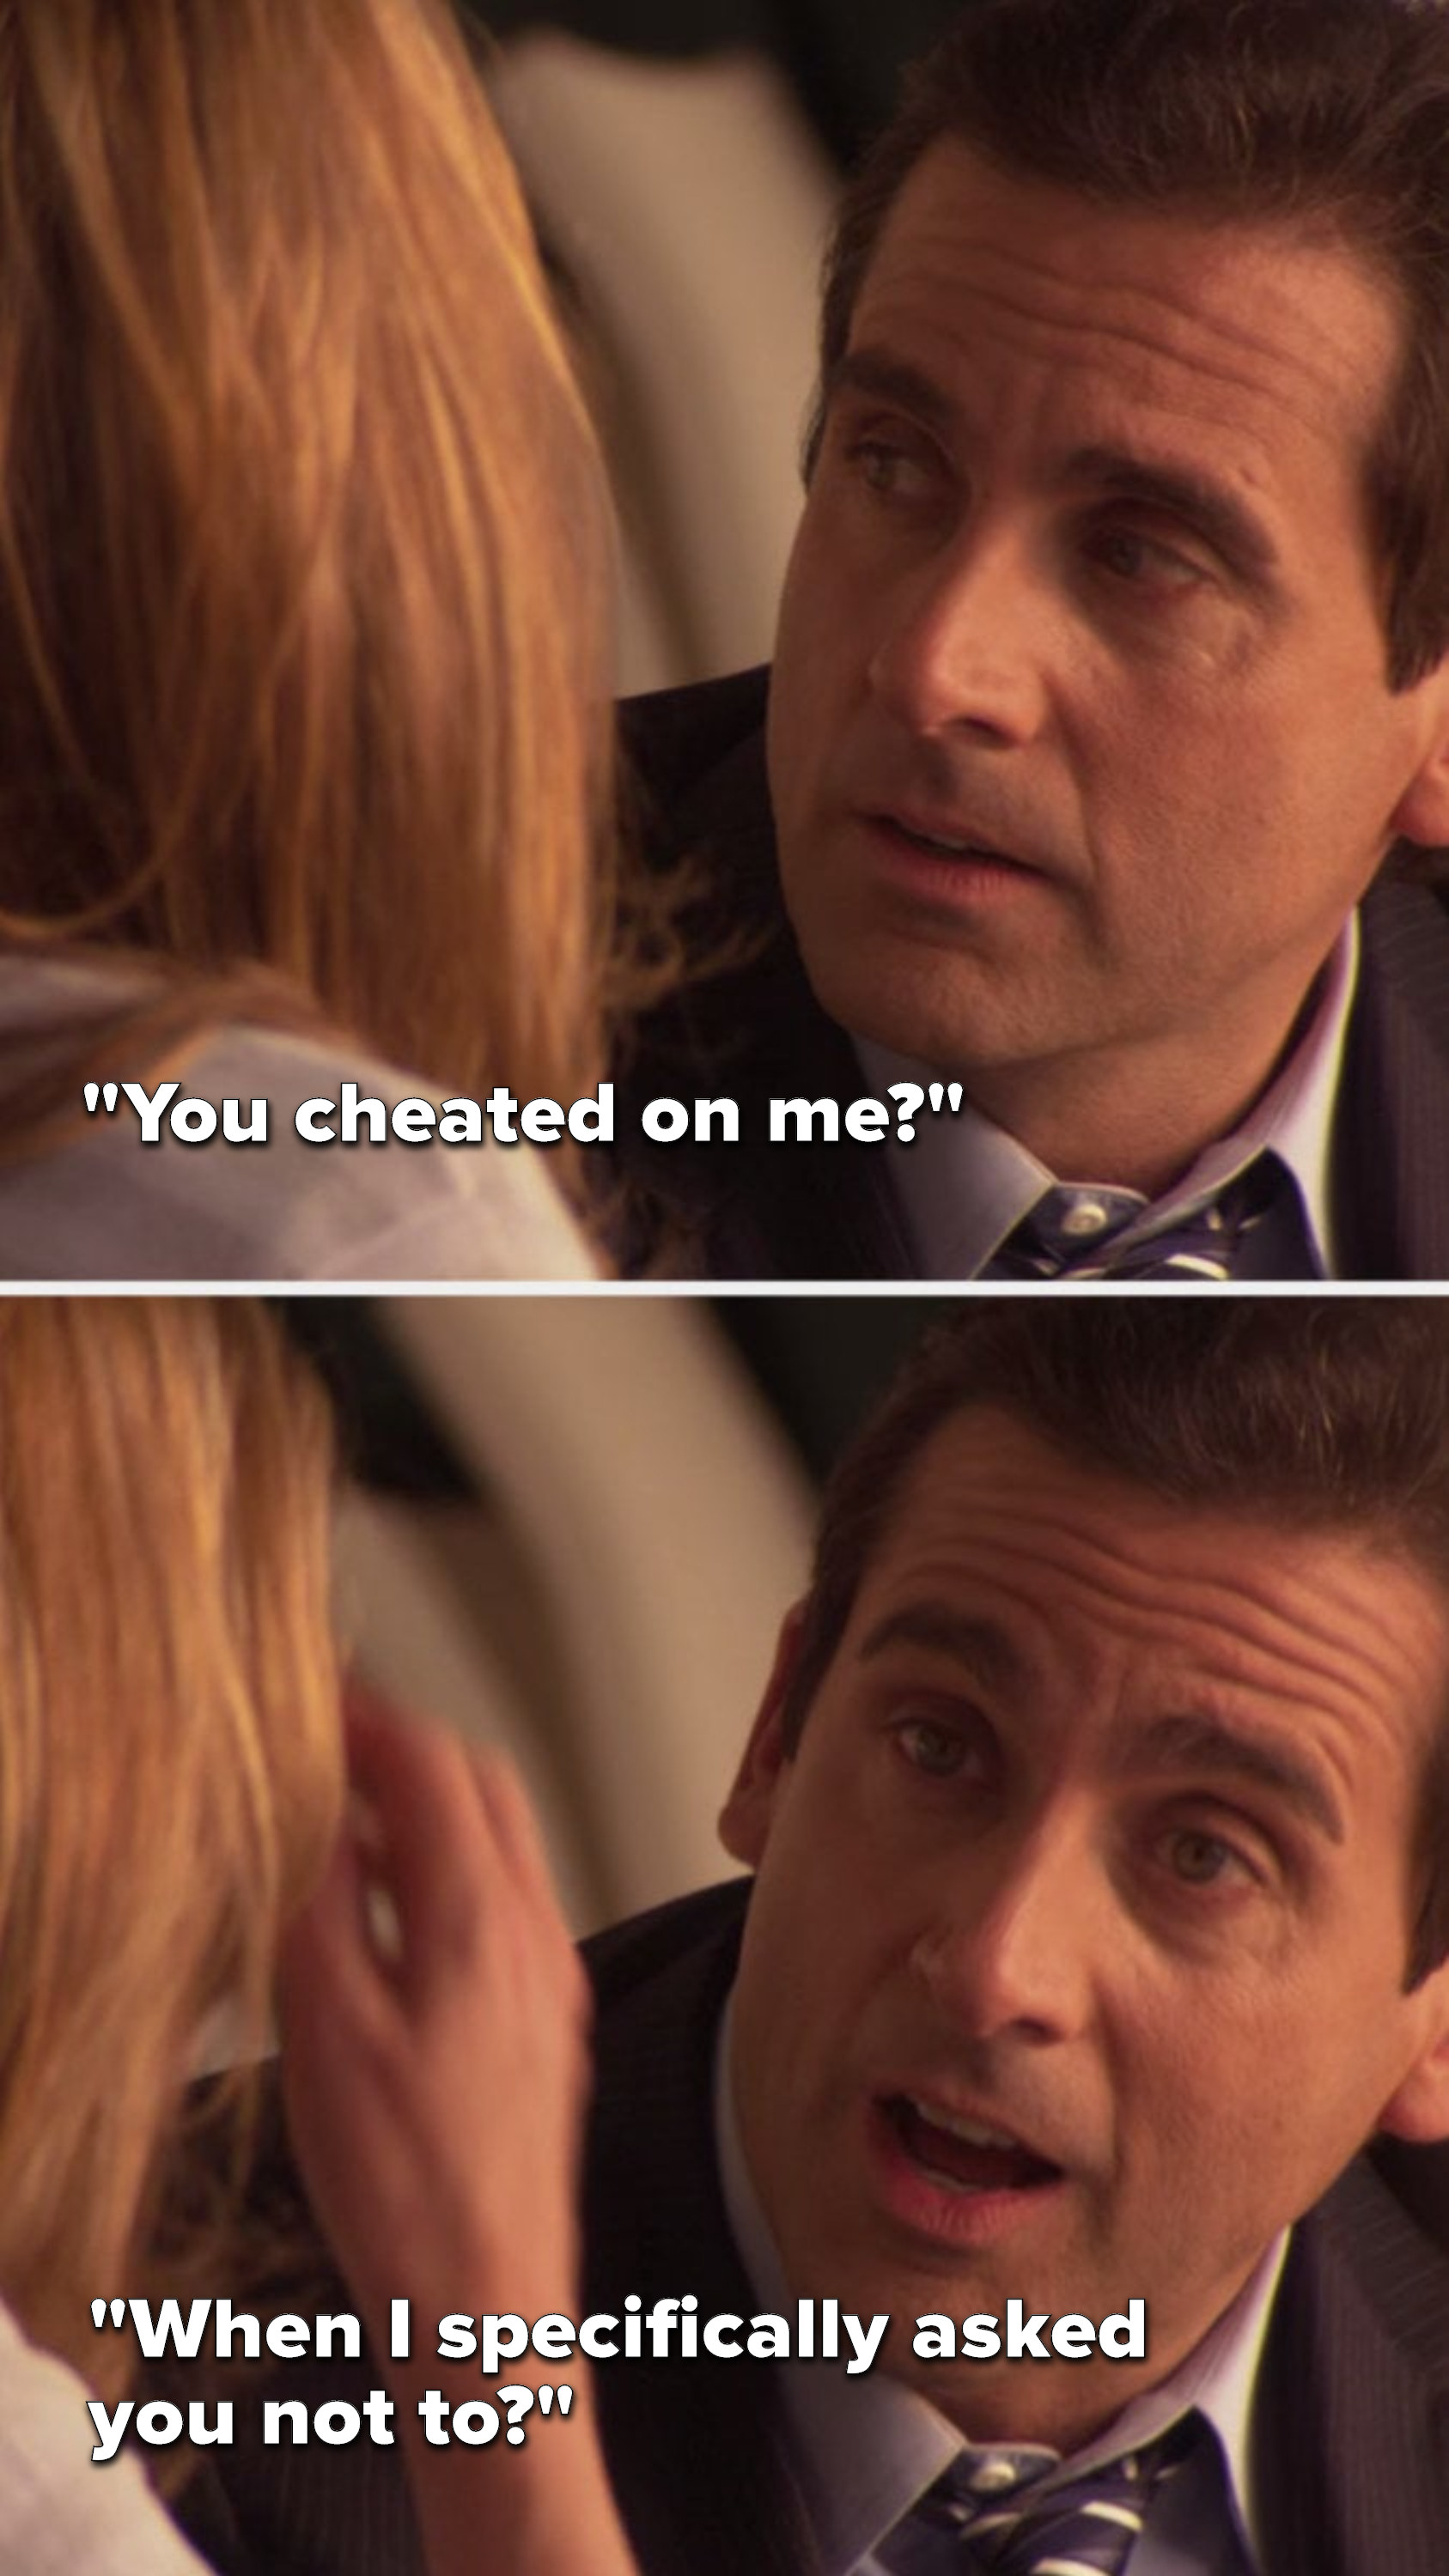 Michael asks, “You cheated on me, when I specifically asked you not to&quot;